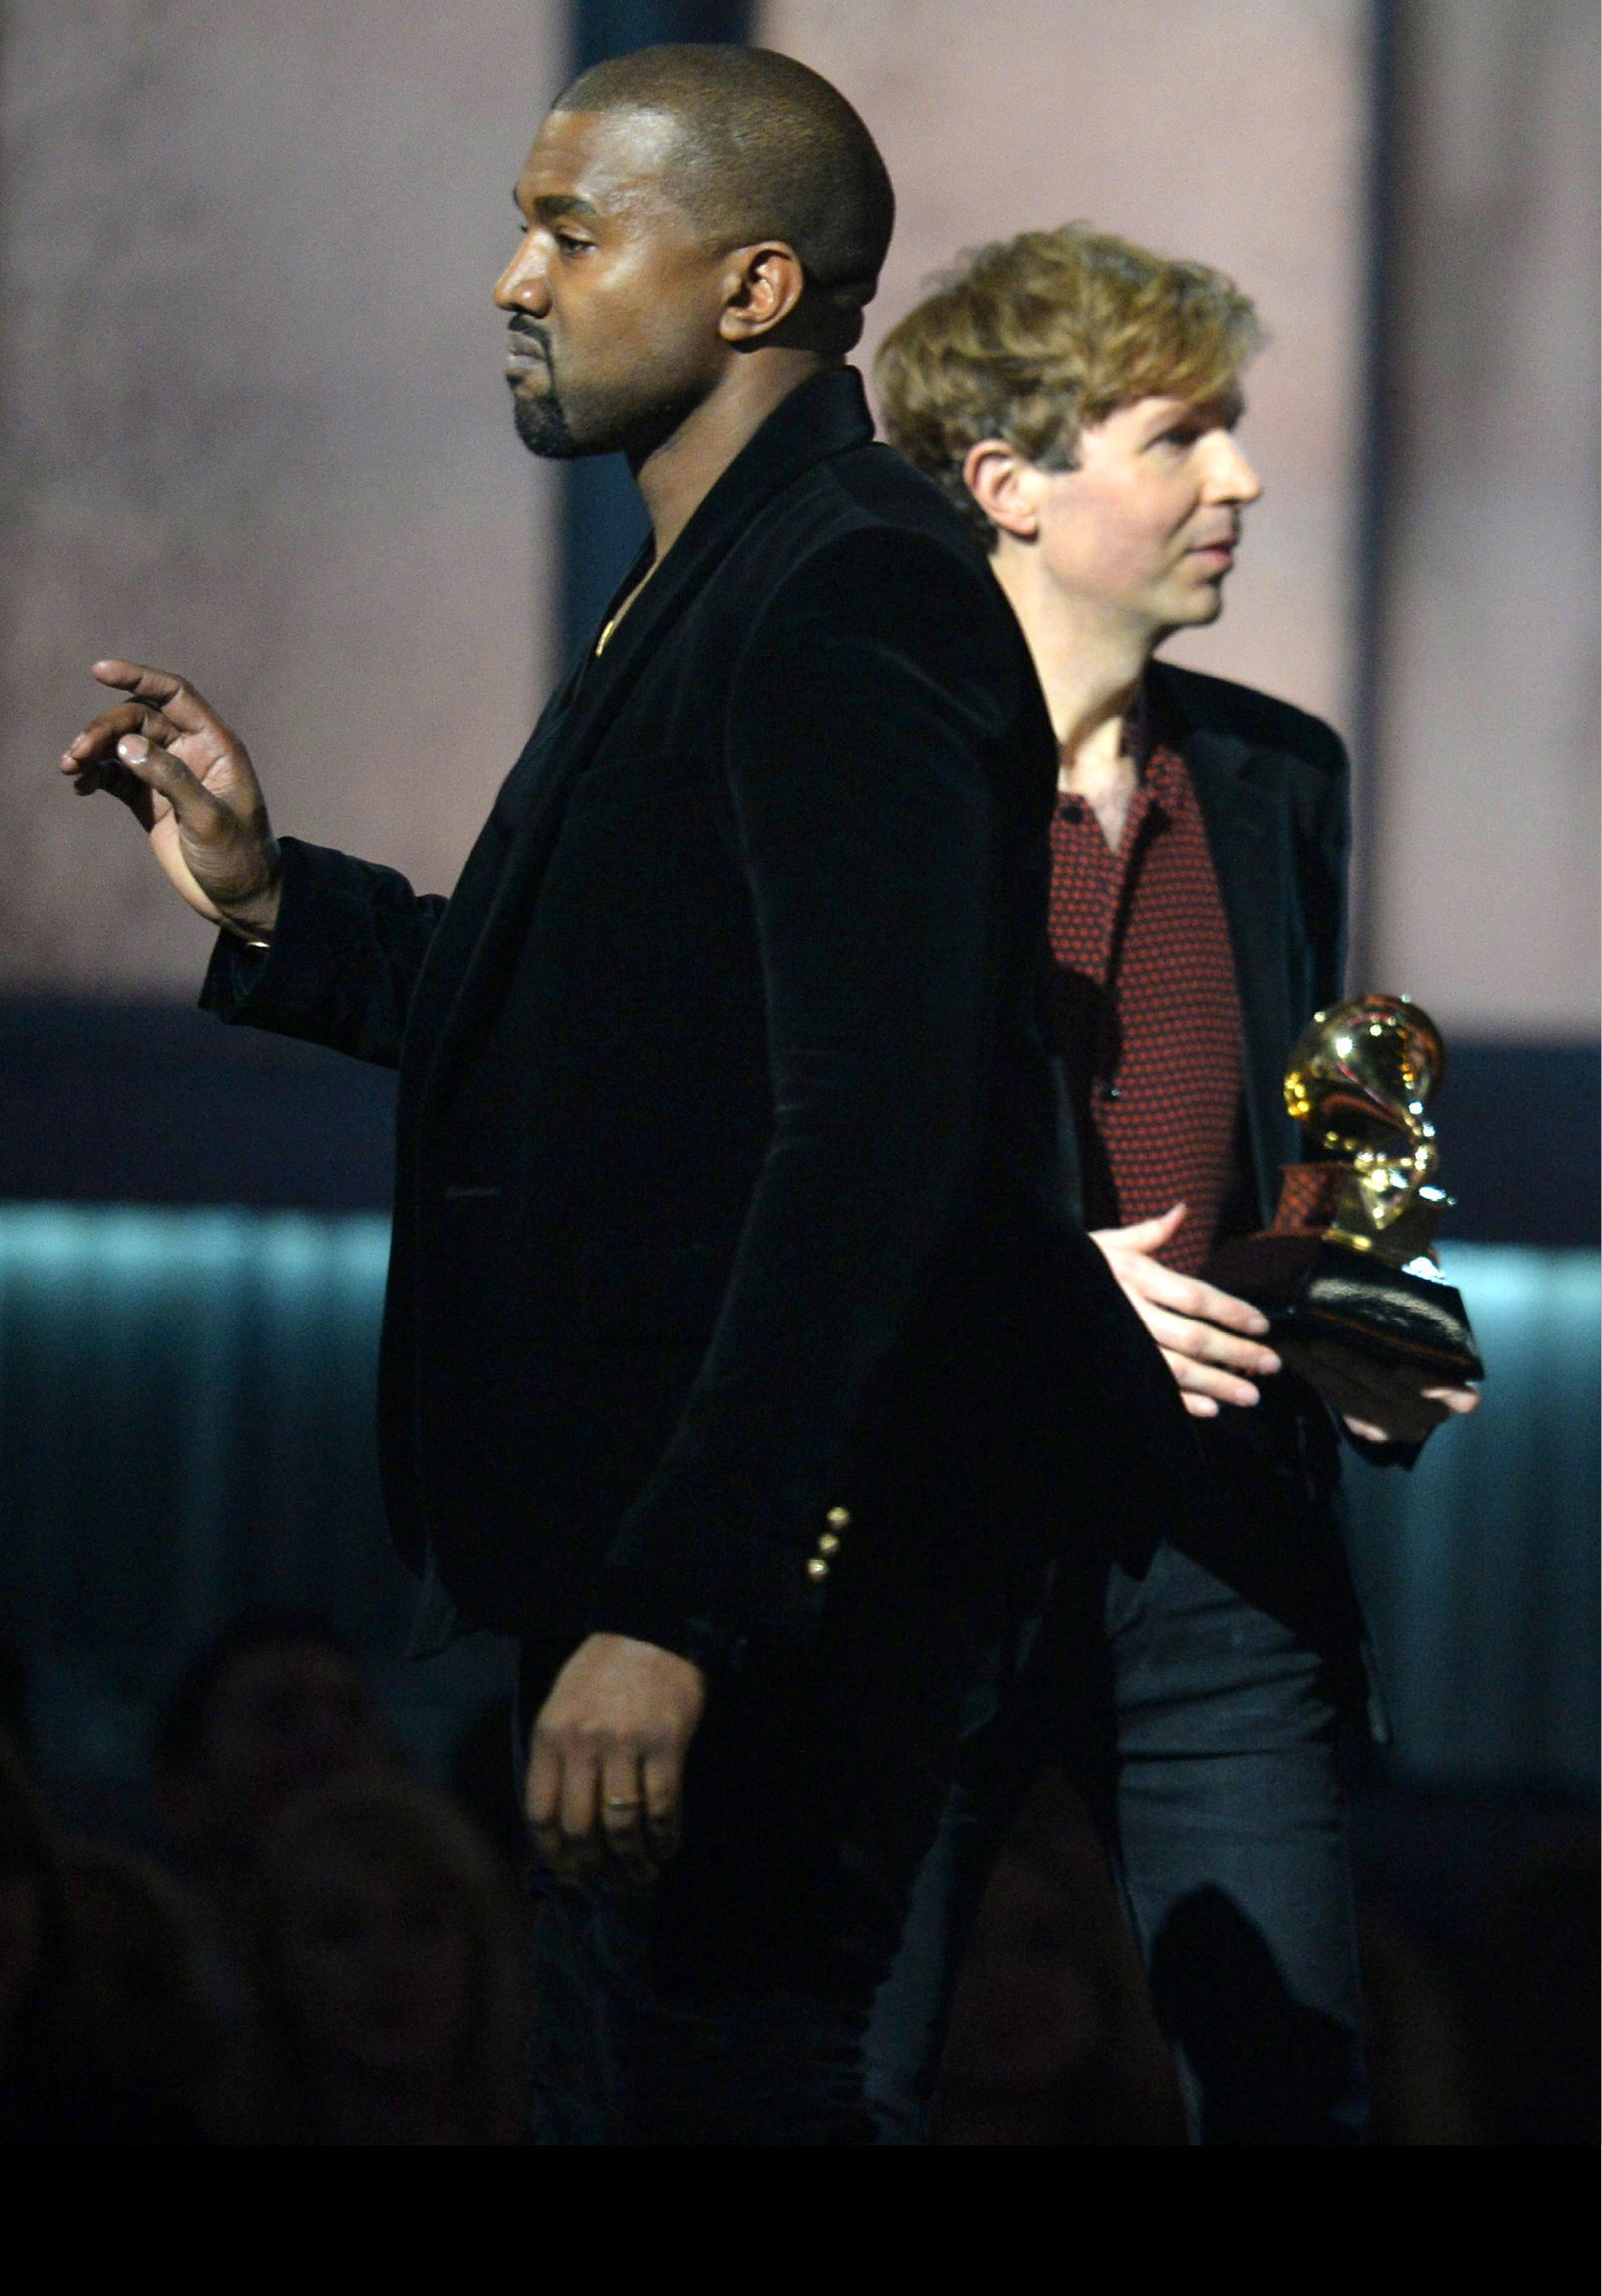 (FILES) In this February 8, 2015 file photo, winner for Album Of The Year Beck reacts as Kanye West appears on stage at the 57th Annual Grammy Awards in Los Angeles February 8, 2015. West on February 11, 2015 urged an overhaul of the Grammys to award commercially successful musicians, even as the rapper toned down his criticism of this year's surprise winner Beck. The famously mercurial West stole the spotlight at the music industry's awards night Sunday when he rushed toward the stage as Beck -- the innovative rocker who has enjoyed critical acclaim, if a niche following, for two decades --accepted the Album of the Year award for his lush, melancholy  Morning Phase.  Soon after the broadcast, West said that Beck should  respect artistry  and give his award to superstar Beyonce for her self-titled album, one of her most intense works which features the ode to marital bliss  Drunk In Love  sung with husband Jay-Z.  AFP PHOTO / ROBYN BECK / FILES